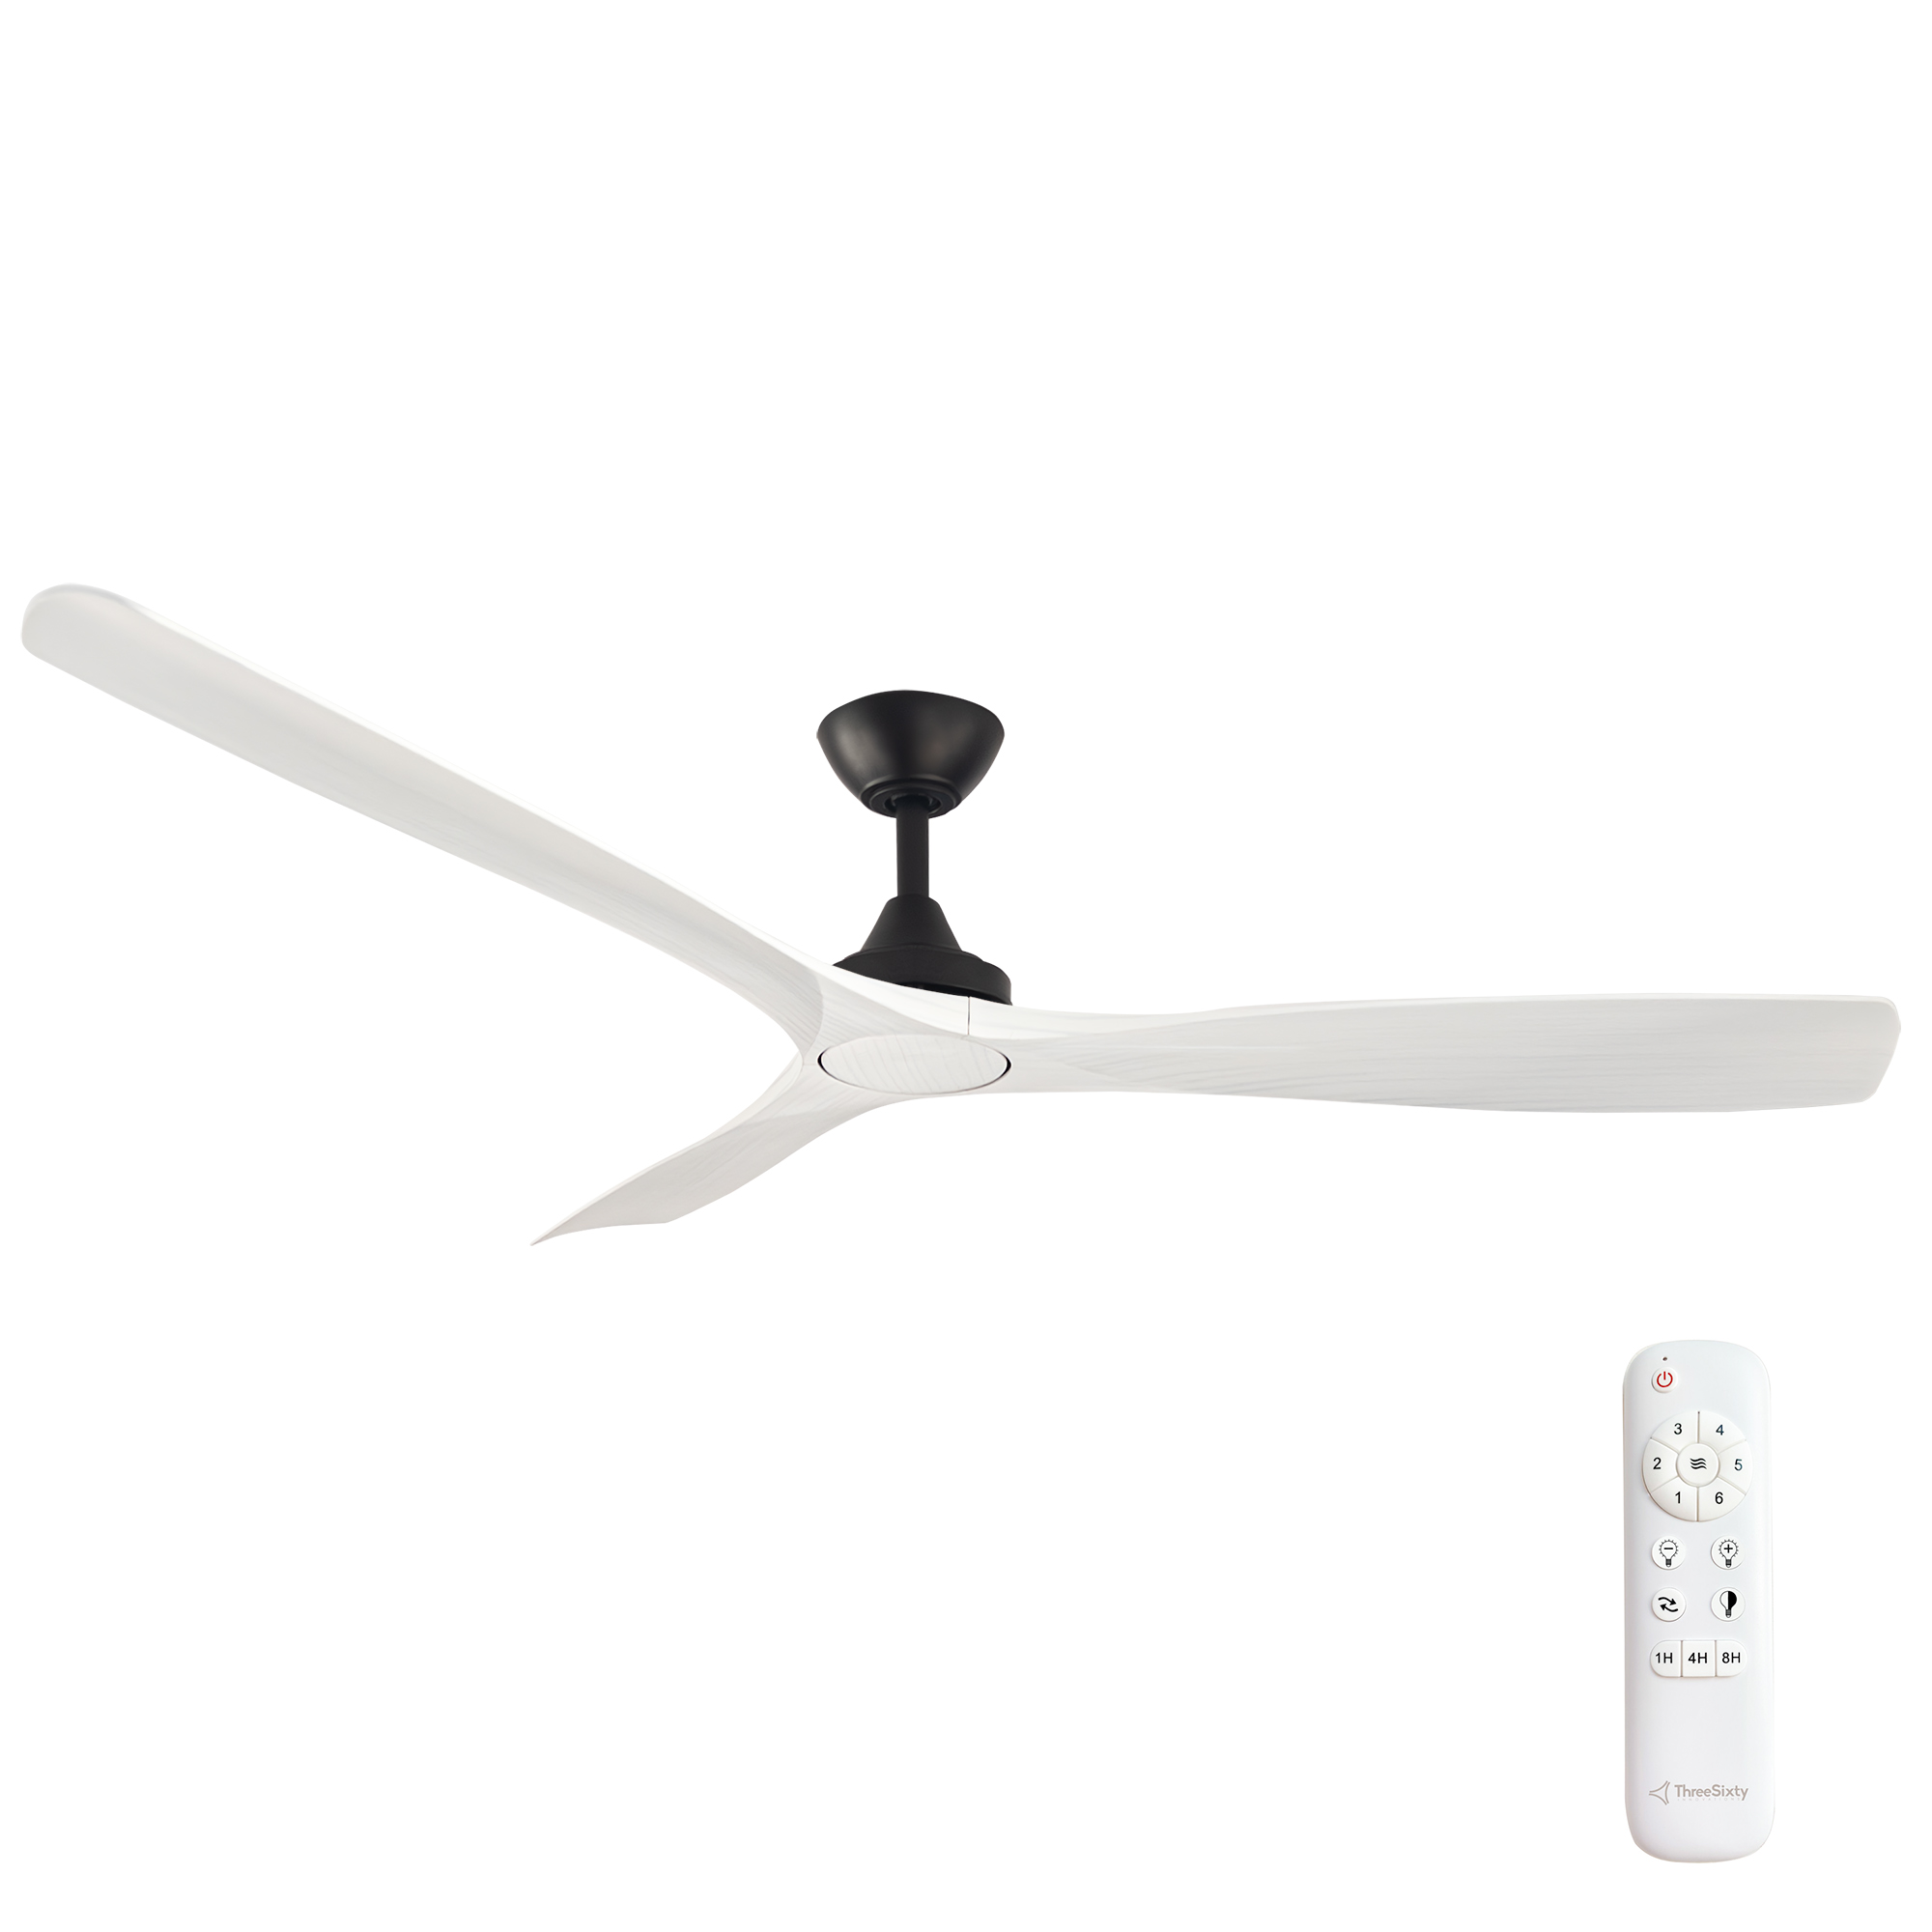 60" Spitfire DC Ceiling Fan in Black with White Wash blades